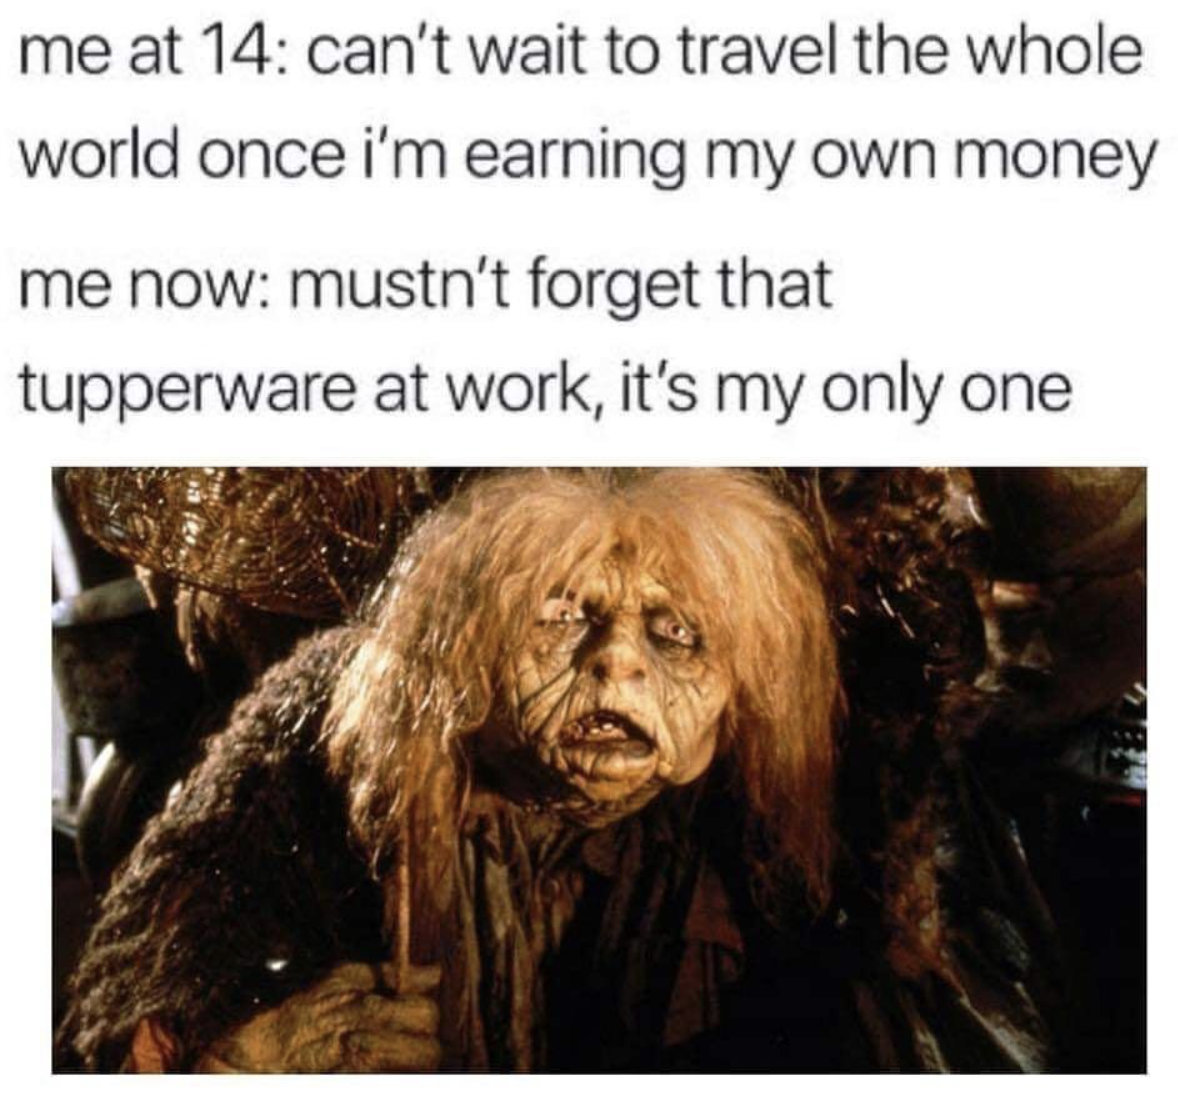 dank meme - my only tupperware meme - me at 14 can't wait to travel the whole world once i'm earning my own money me now mustn't forget that tupperware at work, it's my only one